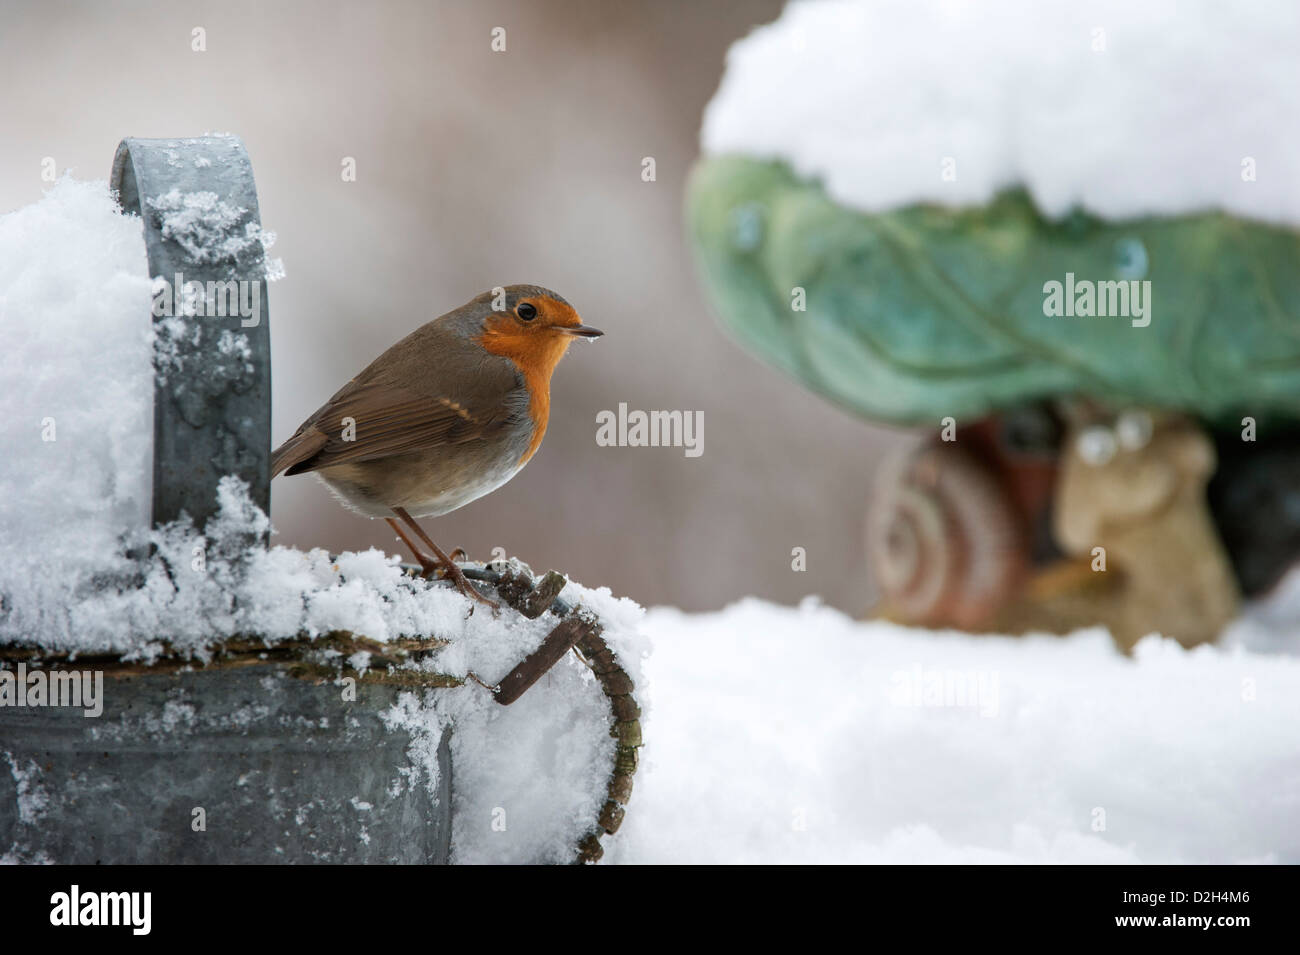 European Robin (Erithacus rubecula) perched on metal watering can in garden in the snow in winter, UK Stock Photo